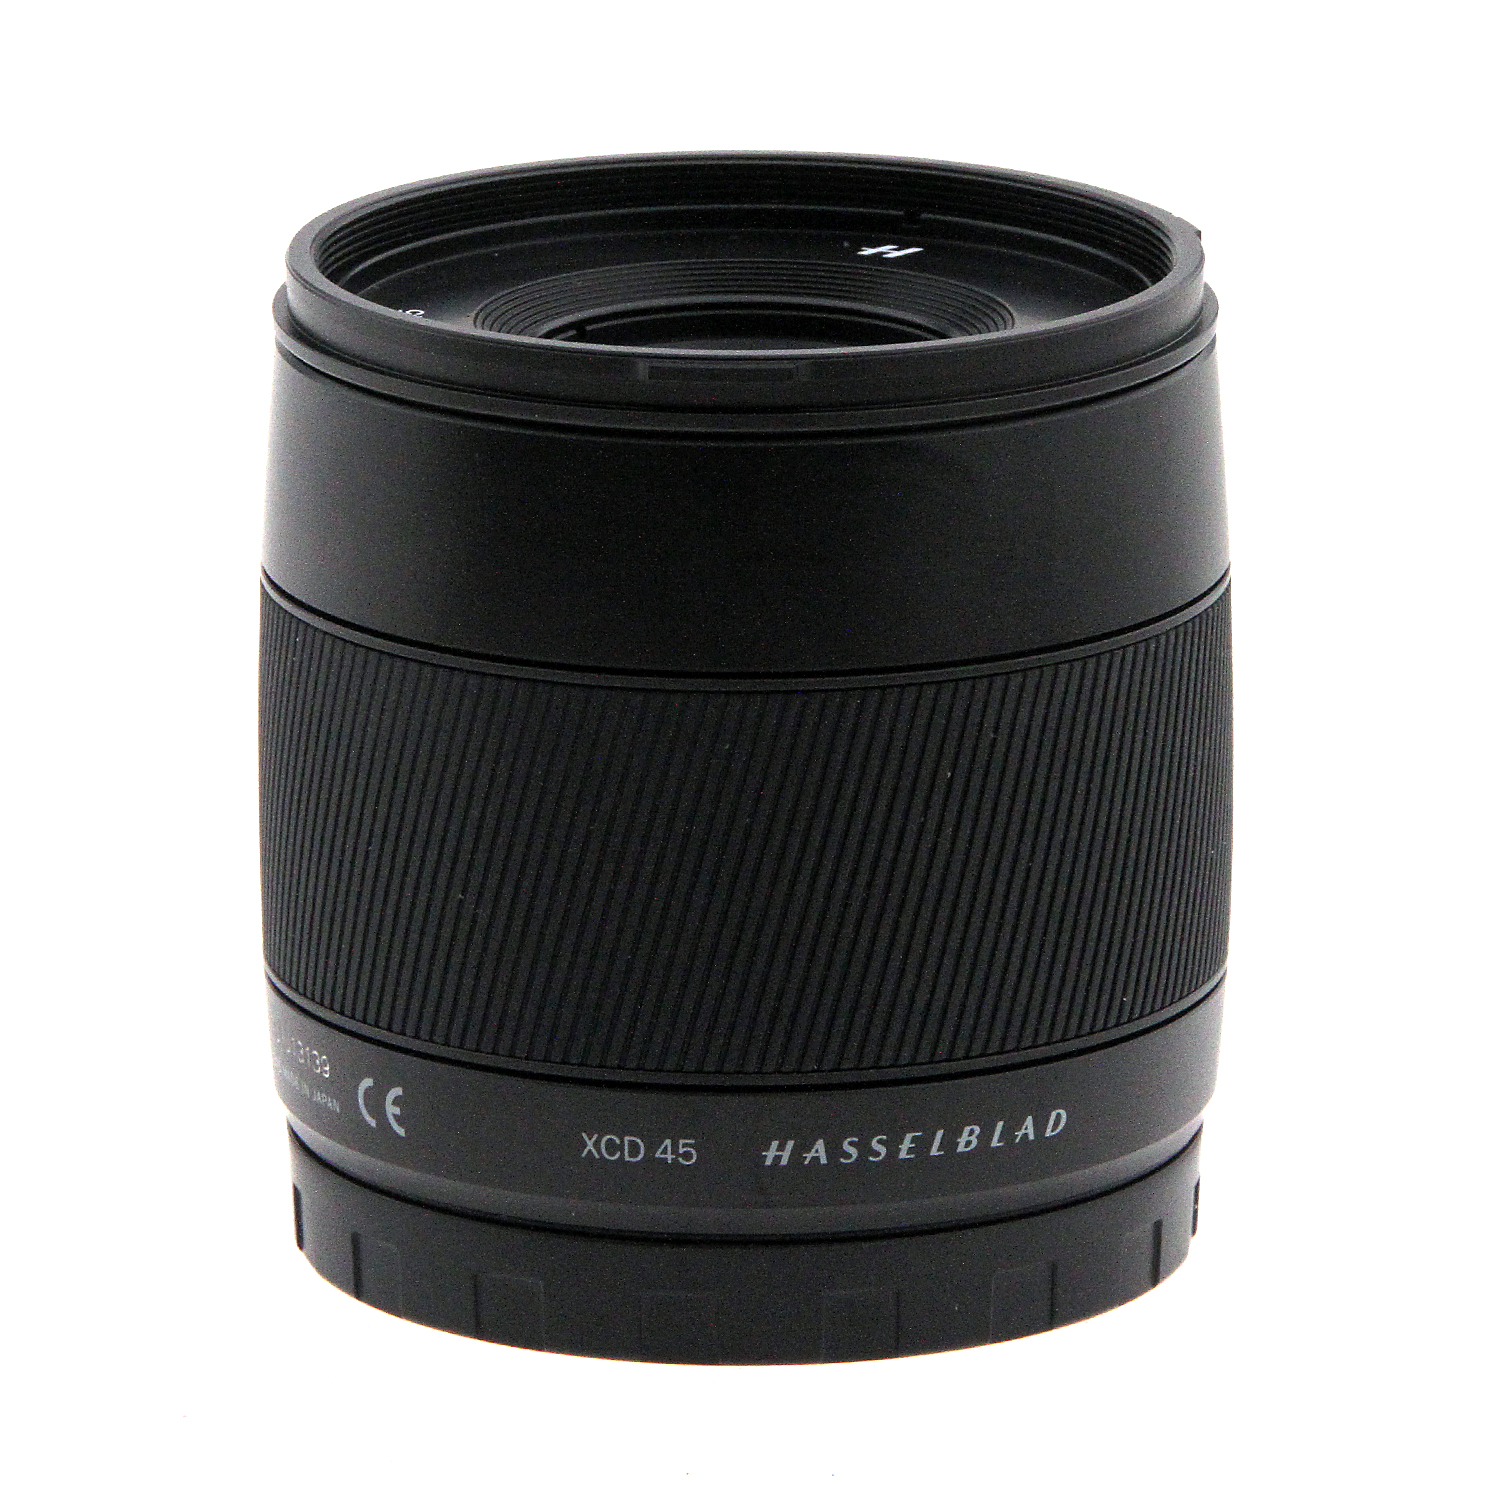 Hasselblad | XCD 45mm f/3.5 Lens - Open Box | H3025045